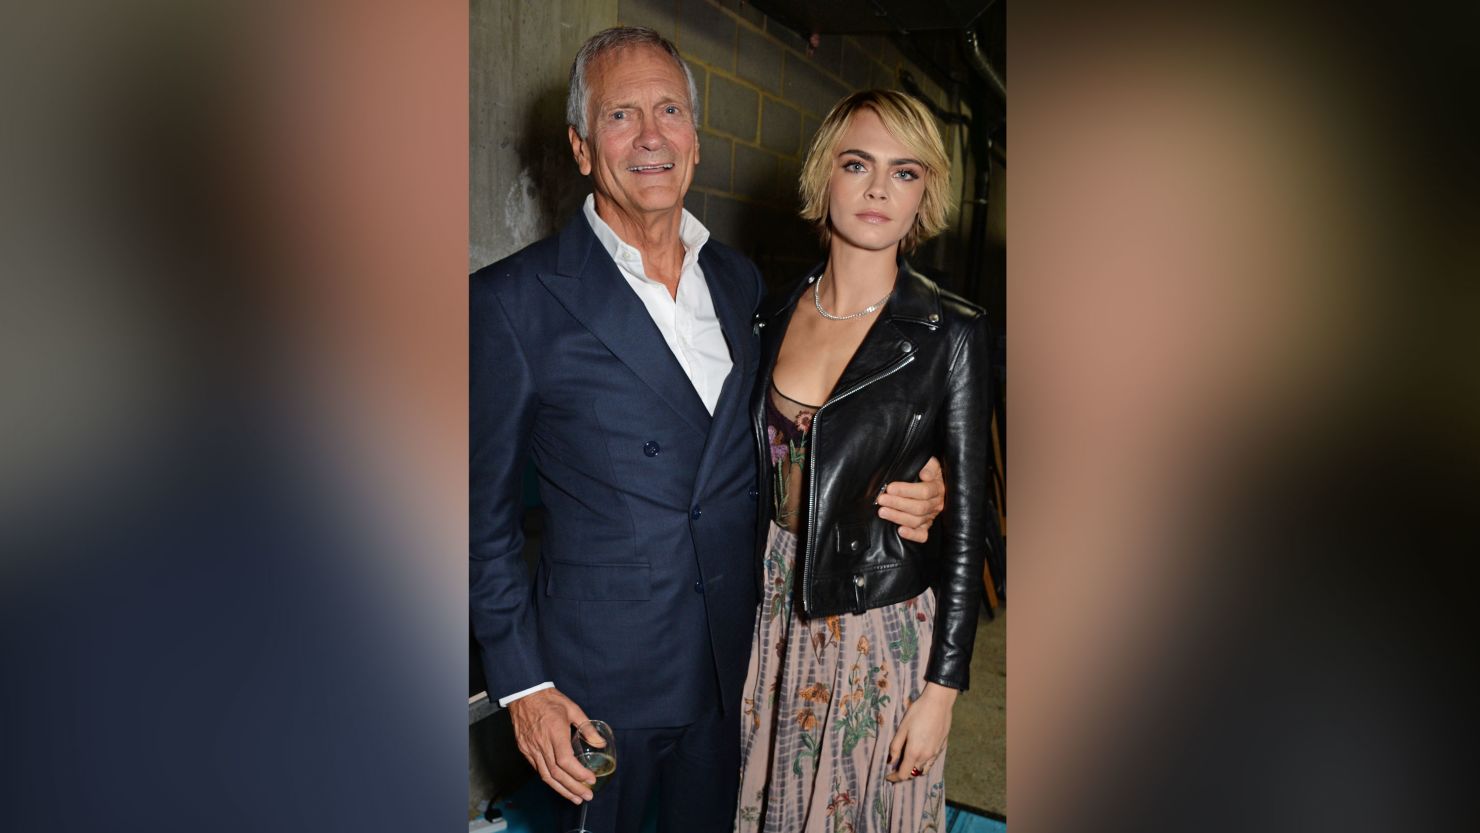 Charles Delevingne and Cara Delevingne pictured in London in 2018.